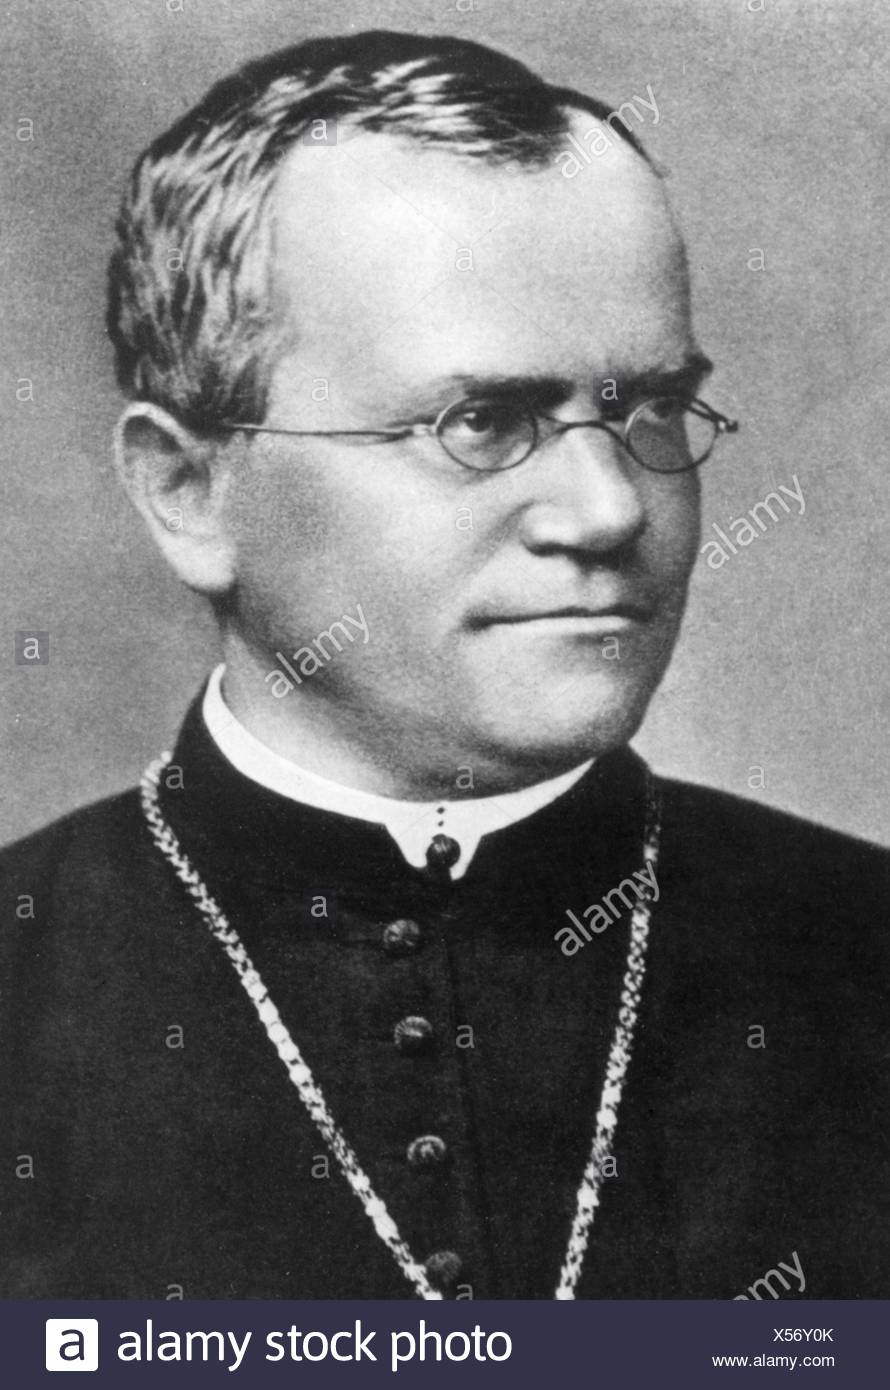 Gregor Mendel High Resolution Stock Photography and Images - Alamy